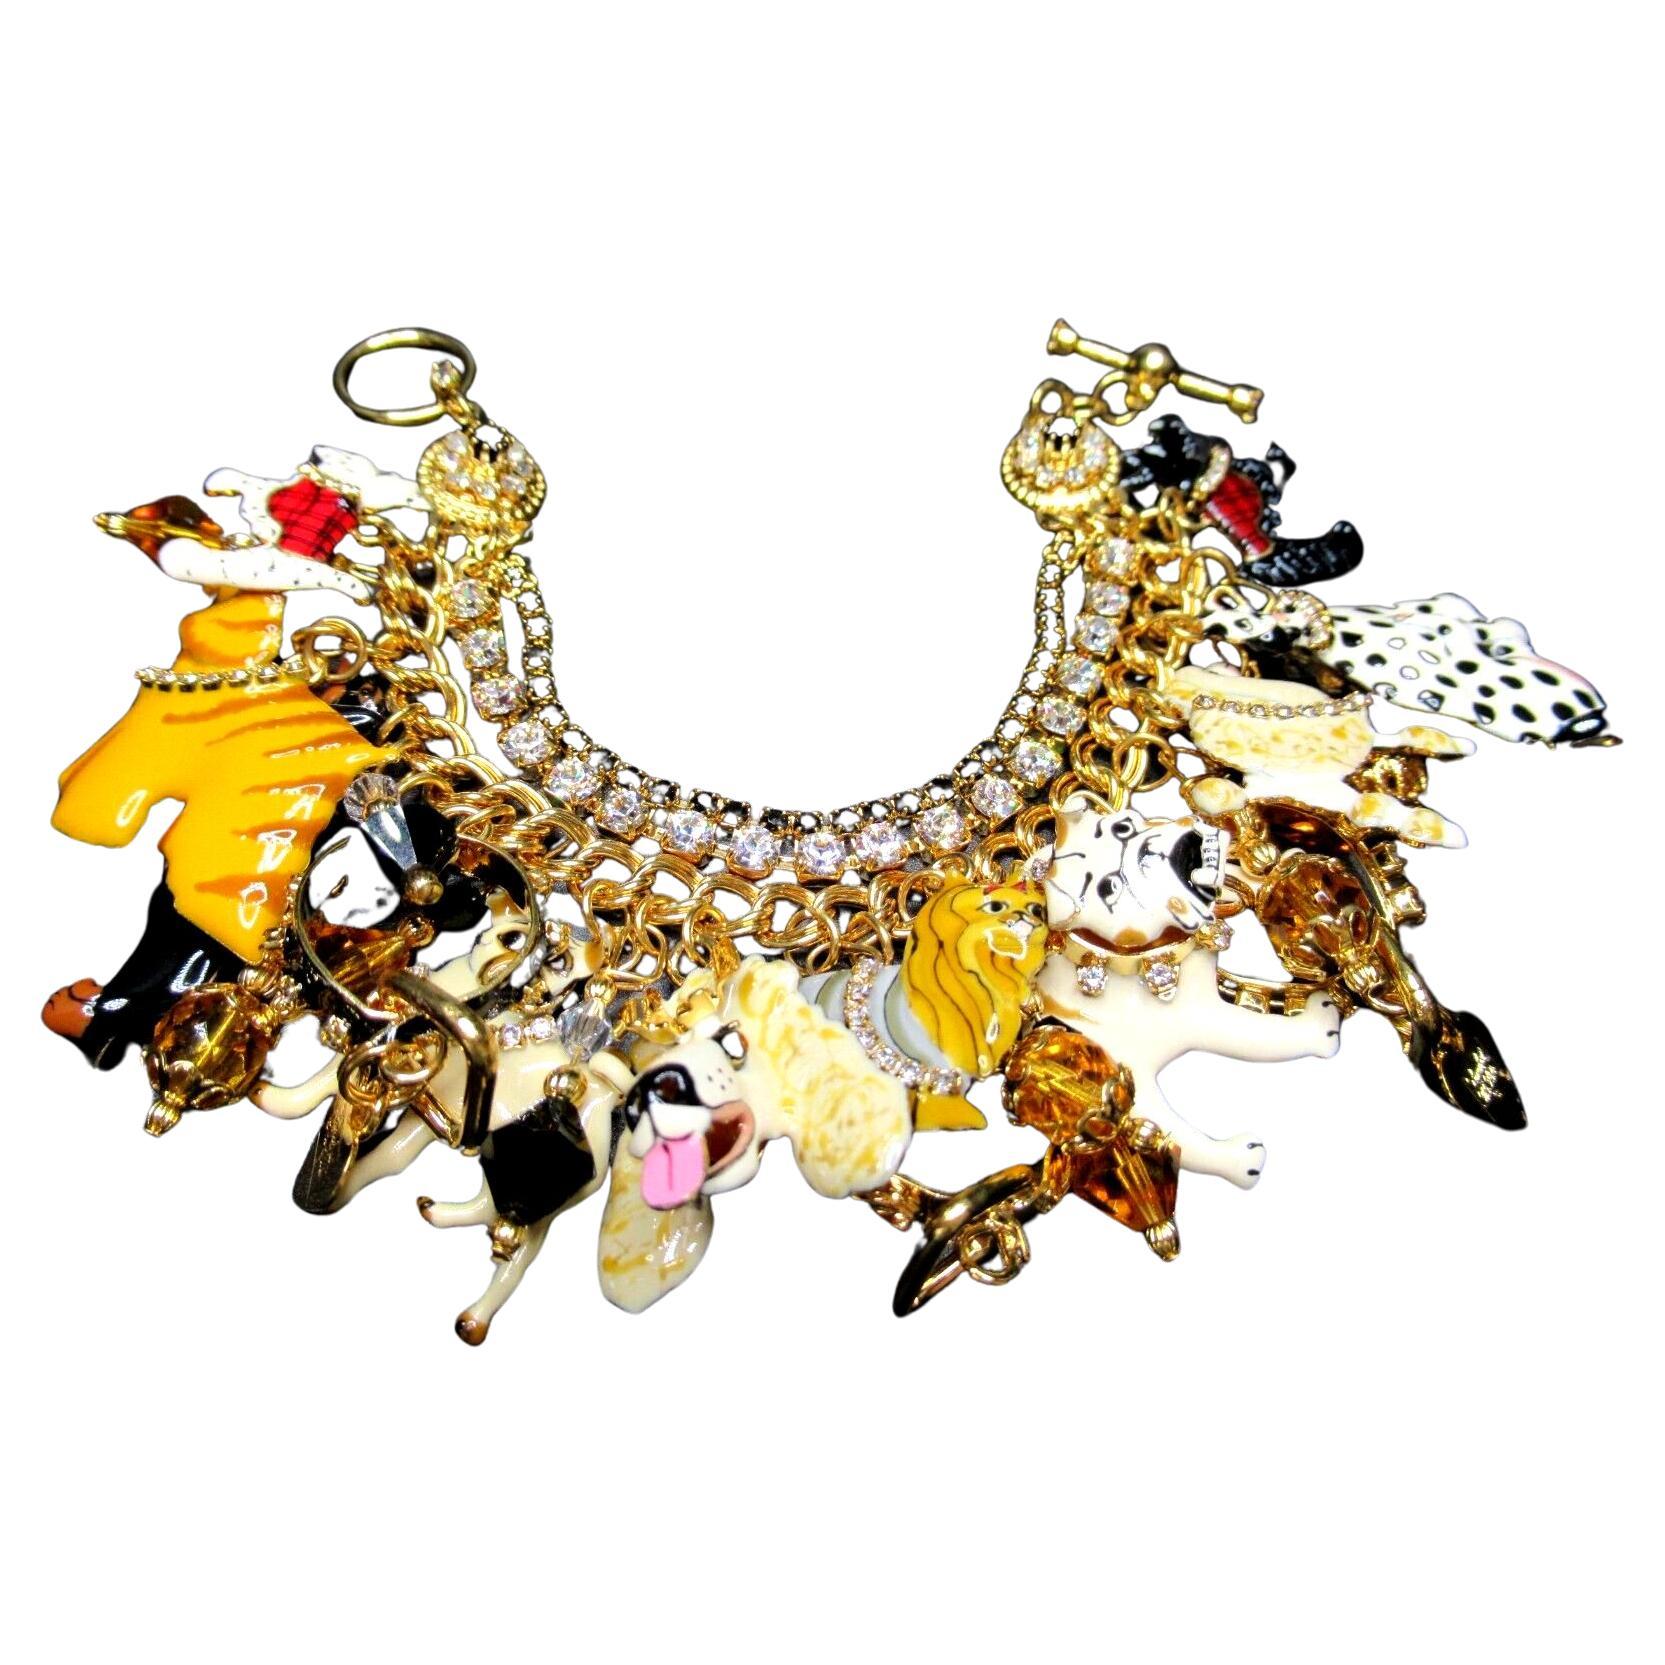 LUNCH AT THE RITZ Kennel Club Enamel and Crystal Dog Charm Statement Bracelet